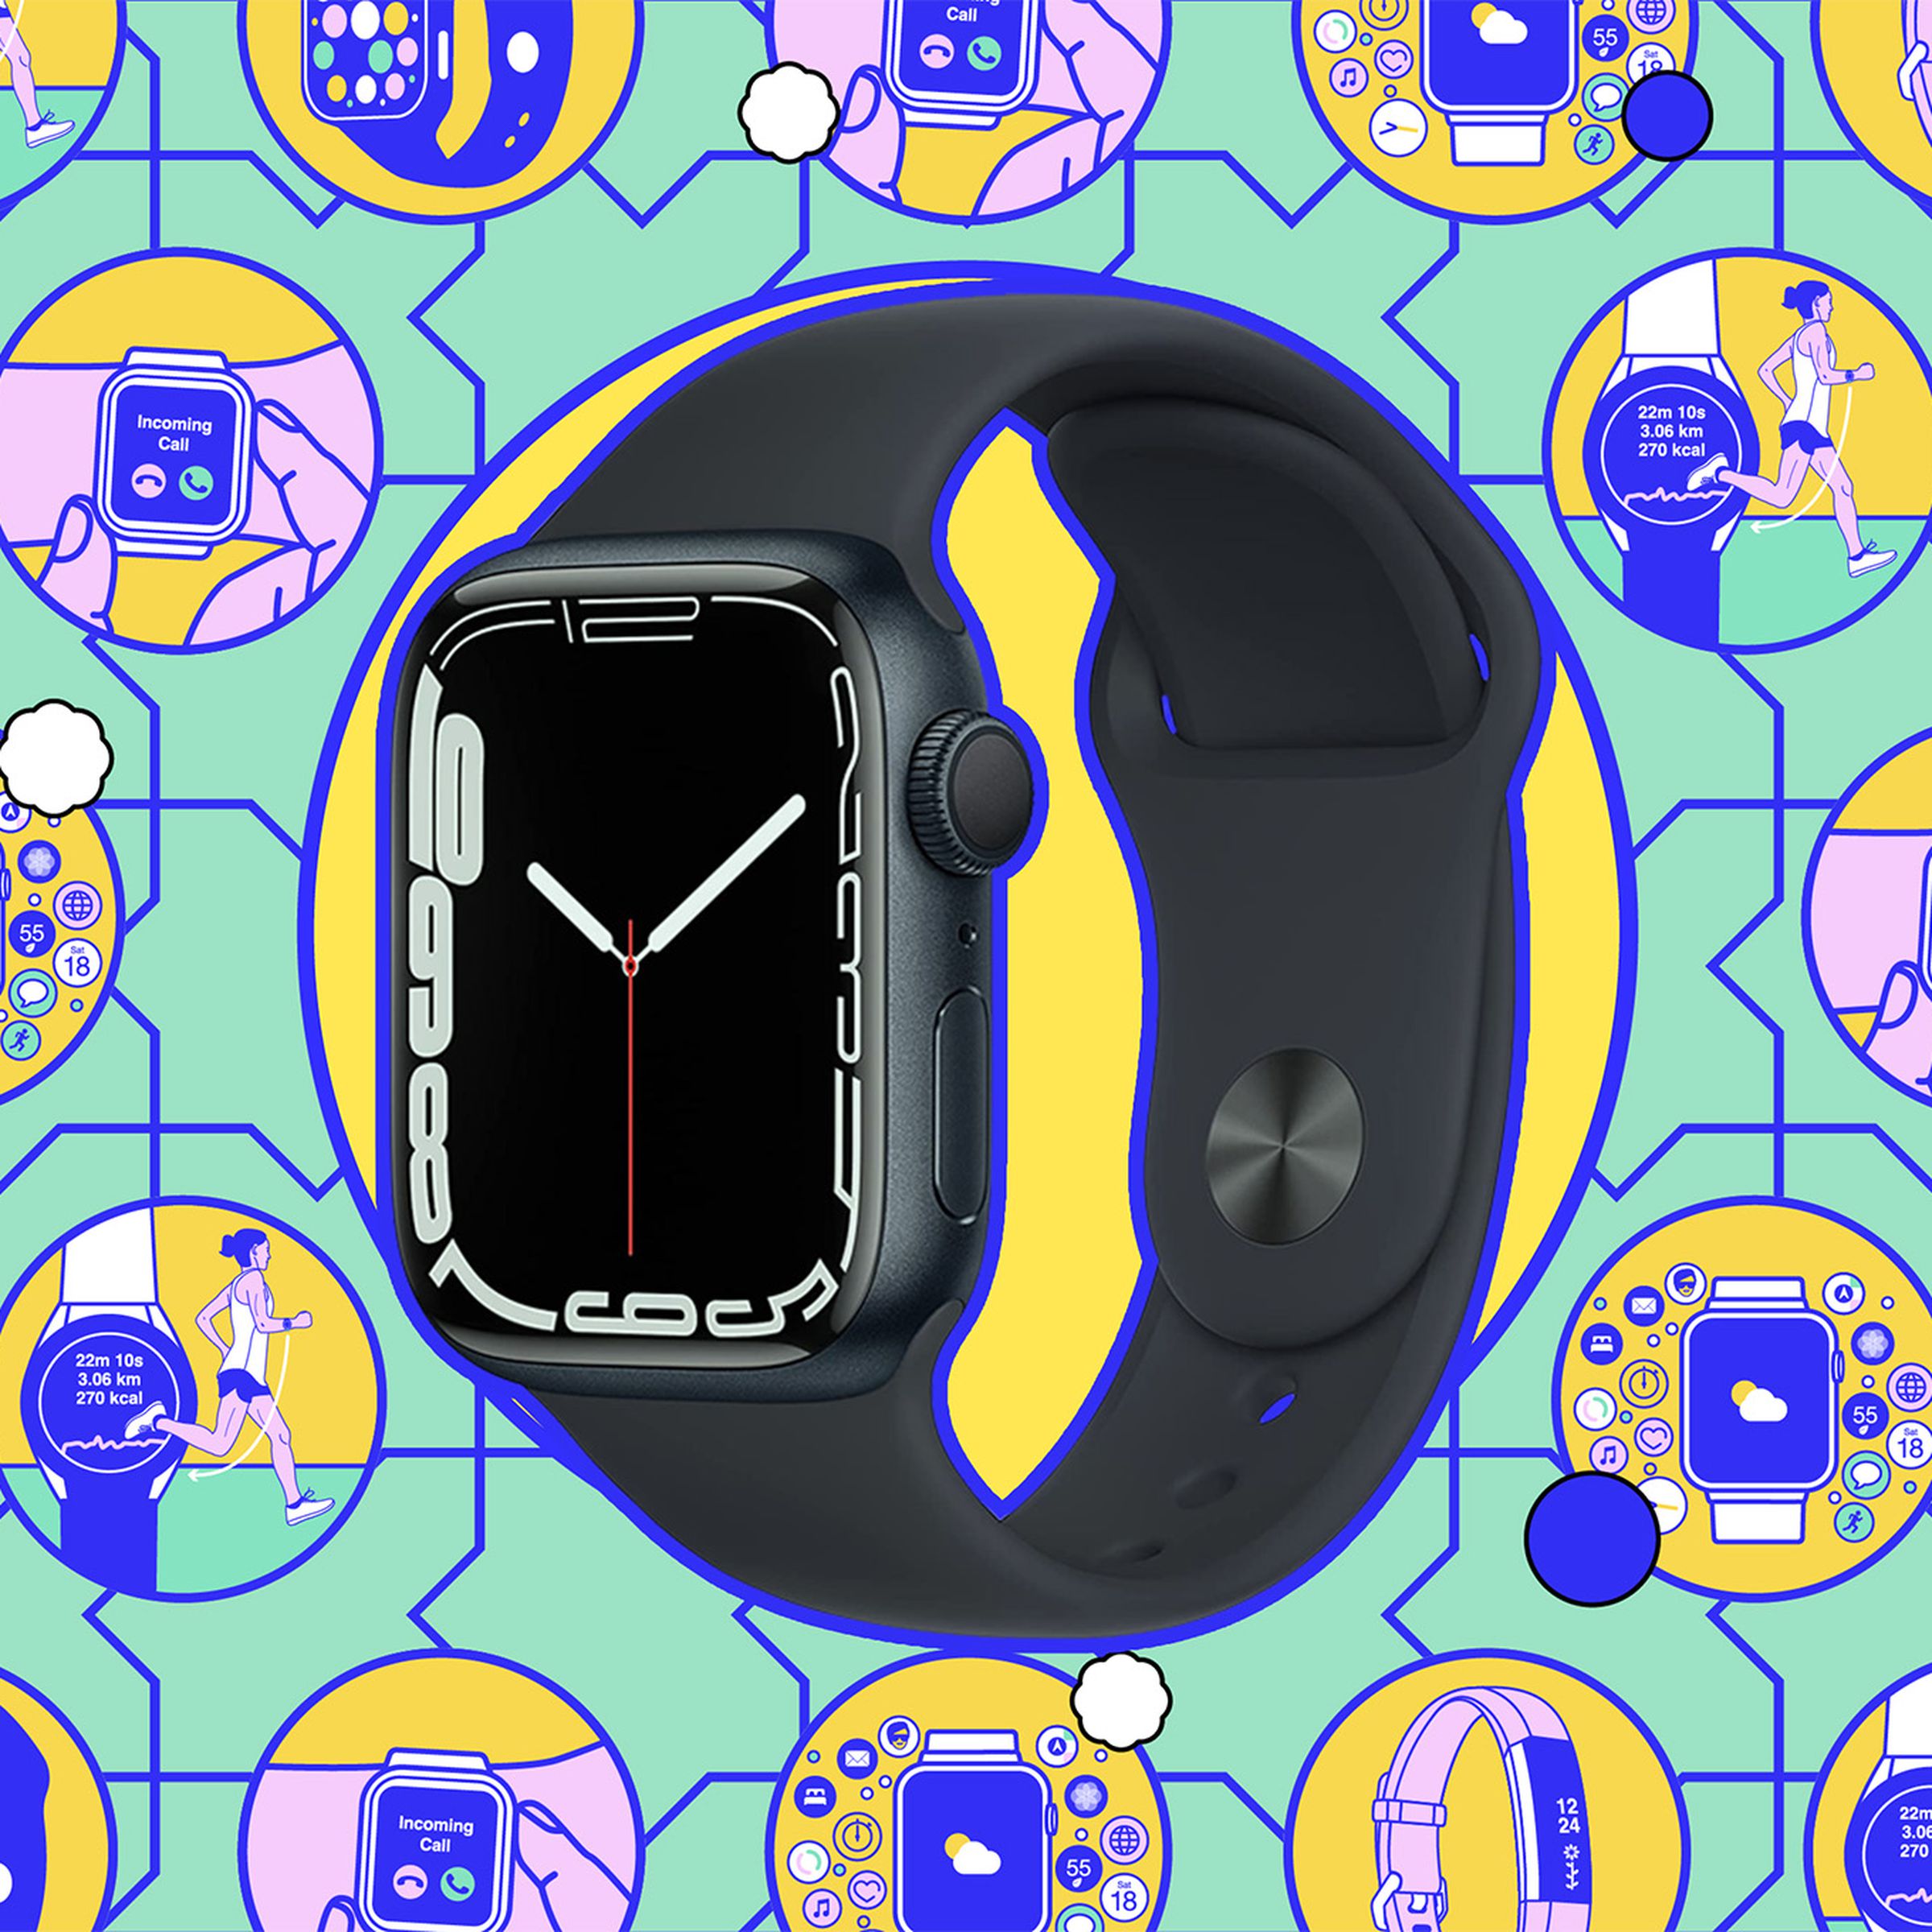 The Apple Watch against a series of colorful illustrations depicting smartwatch use